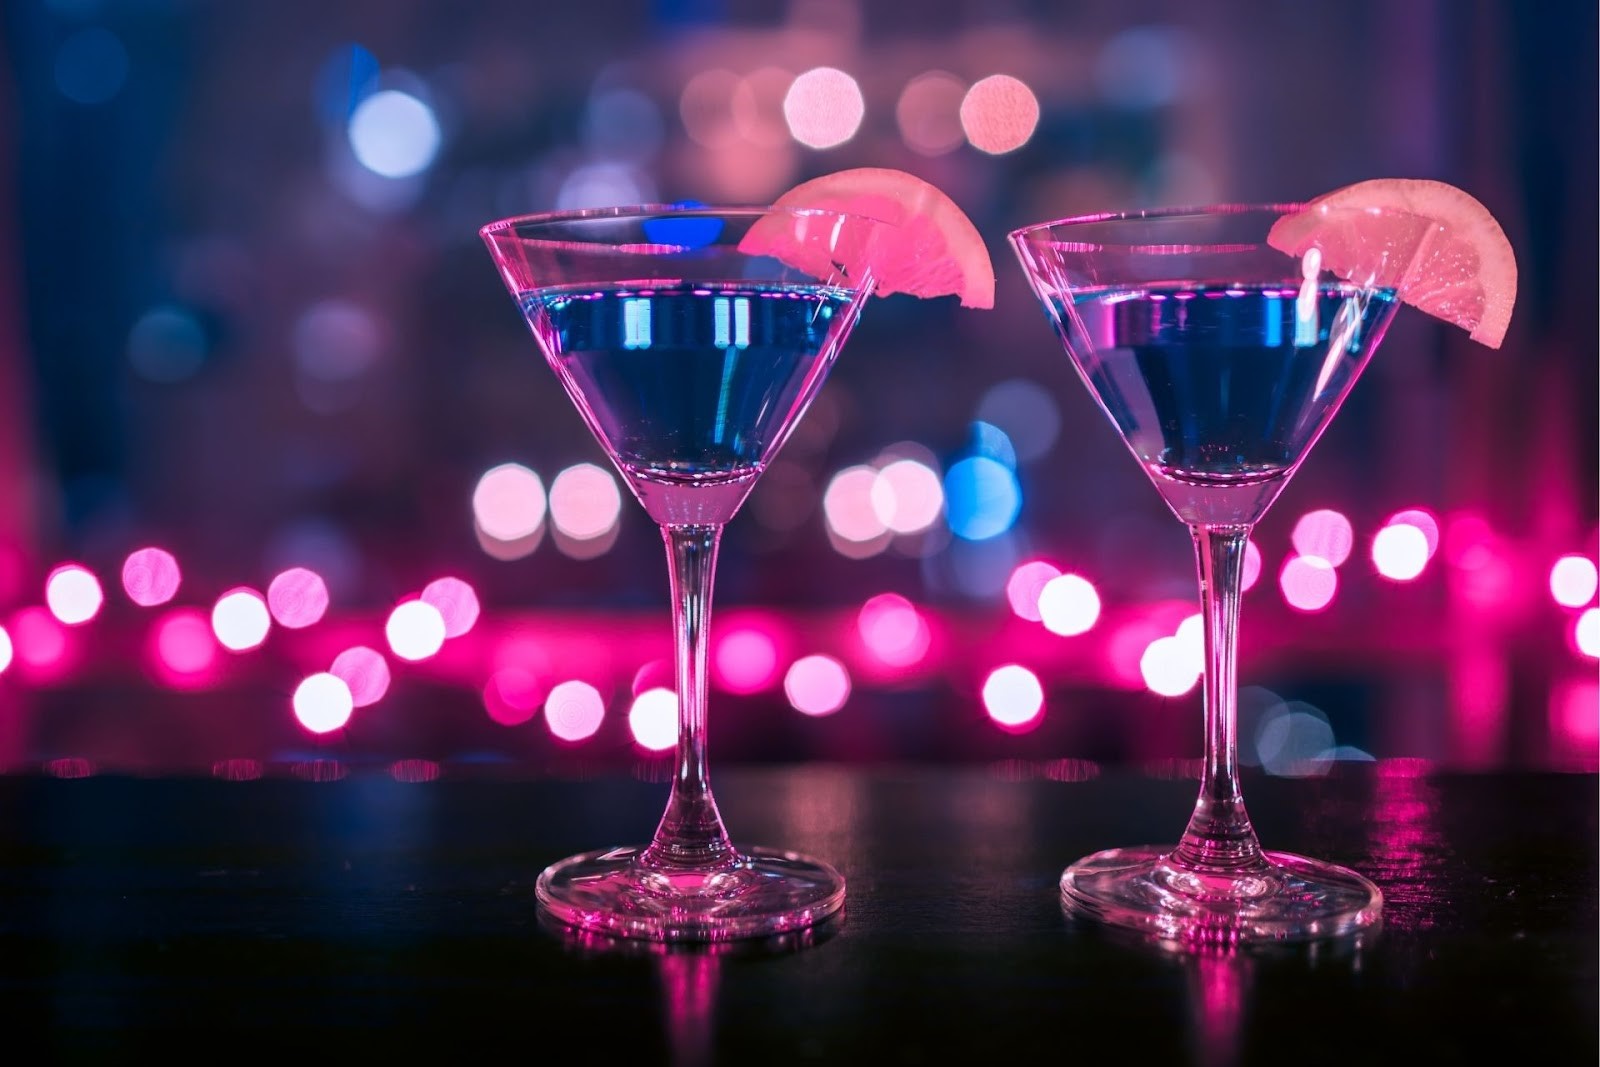 Two New Year’s Cocktails on a table